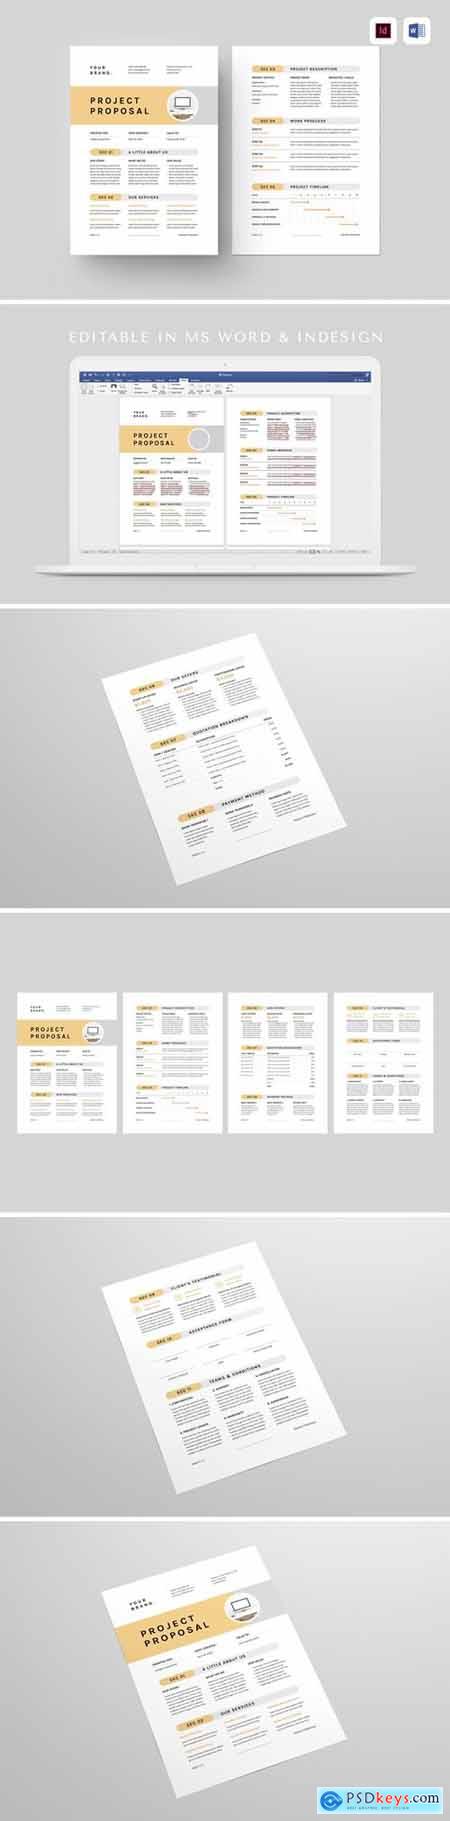 Proposal - MS Word & Indesign